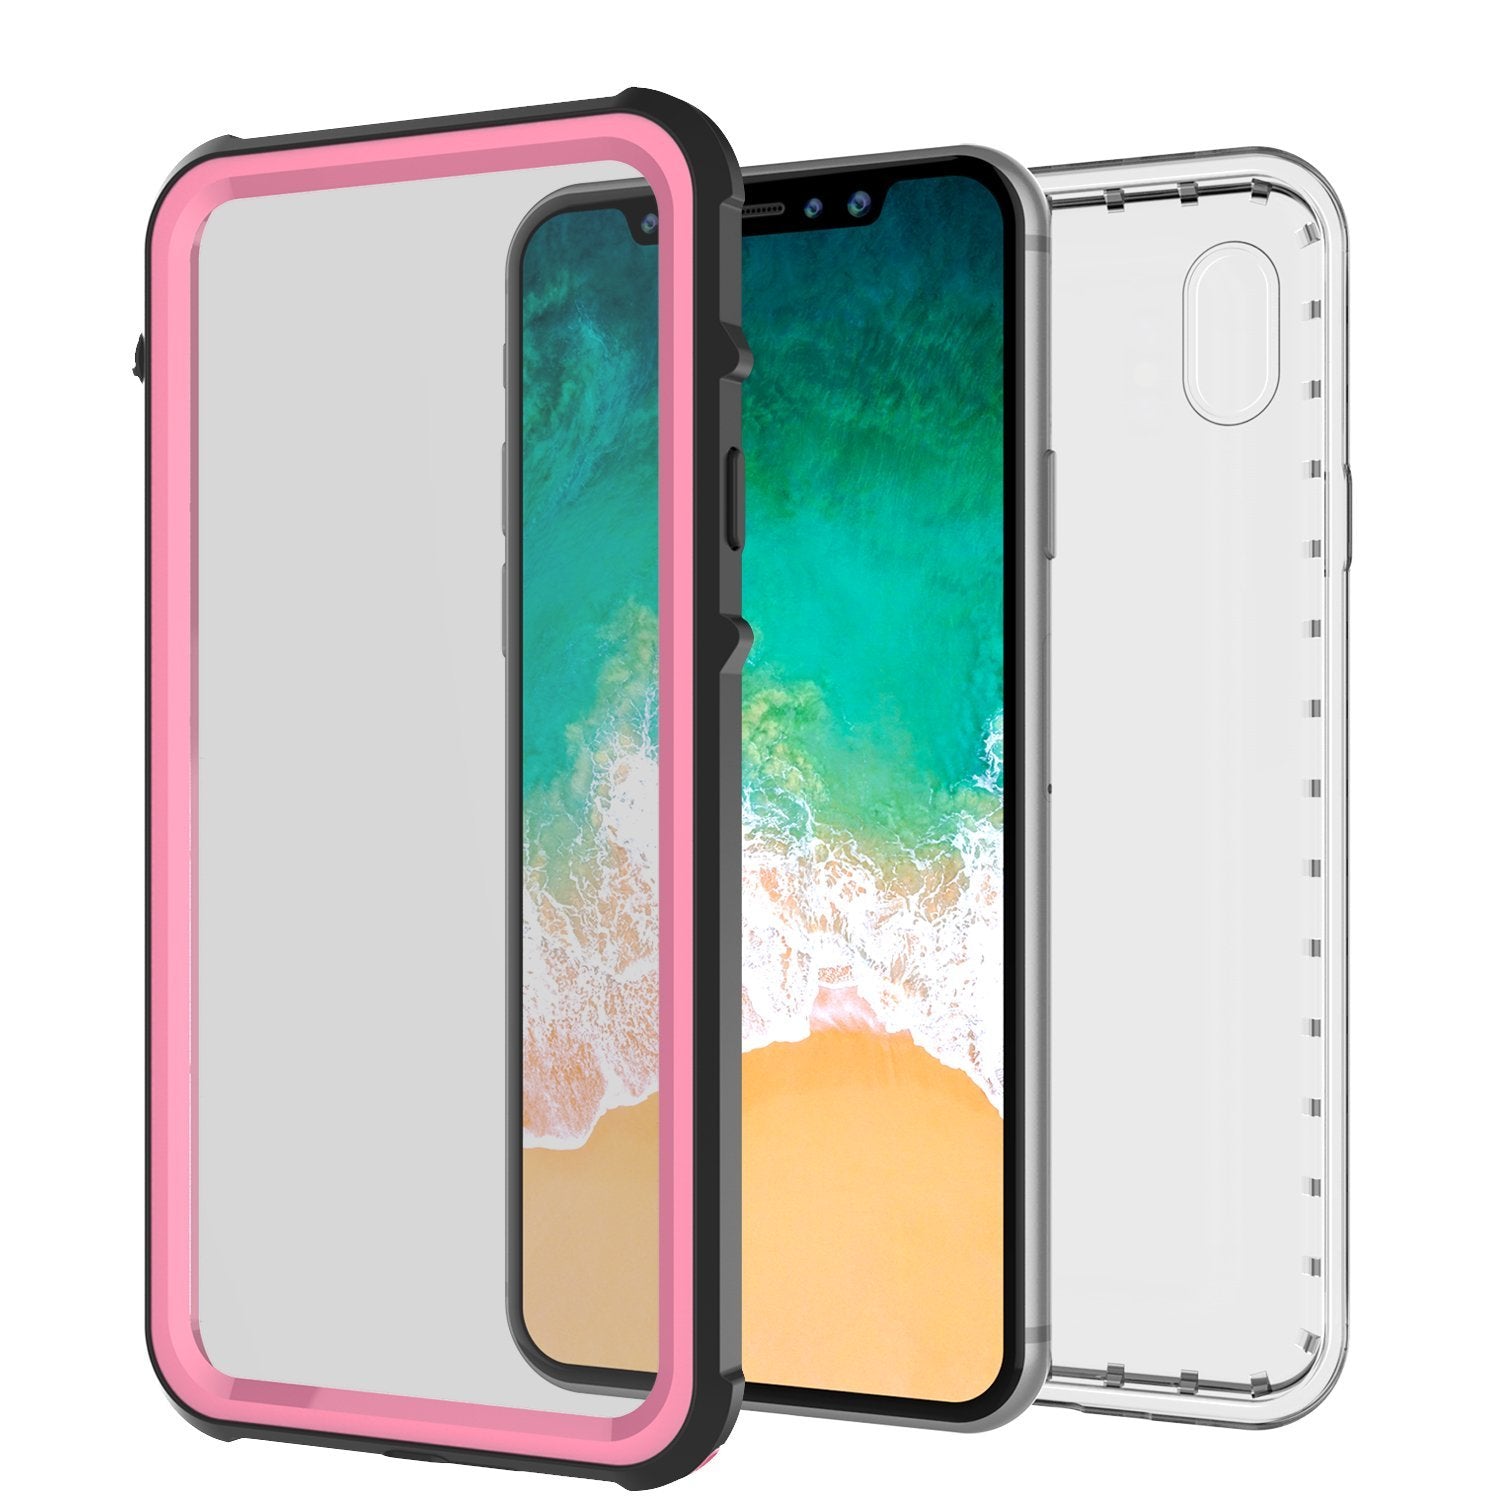 iPhone XS Max Case, PUNKCase [CRYSTAL SERIES] Protective IP68 Certified Cover [Pink]